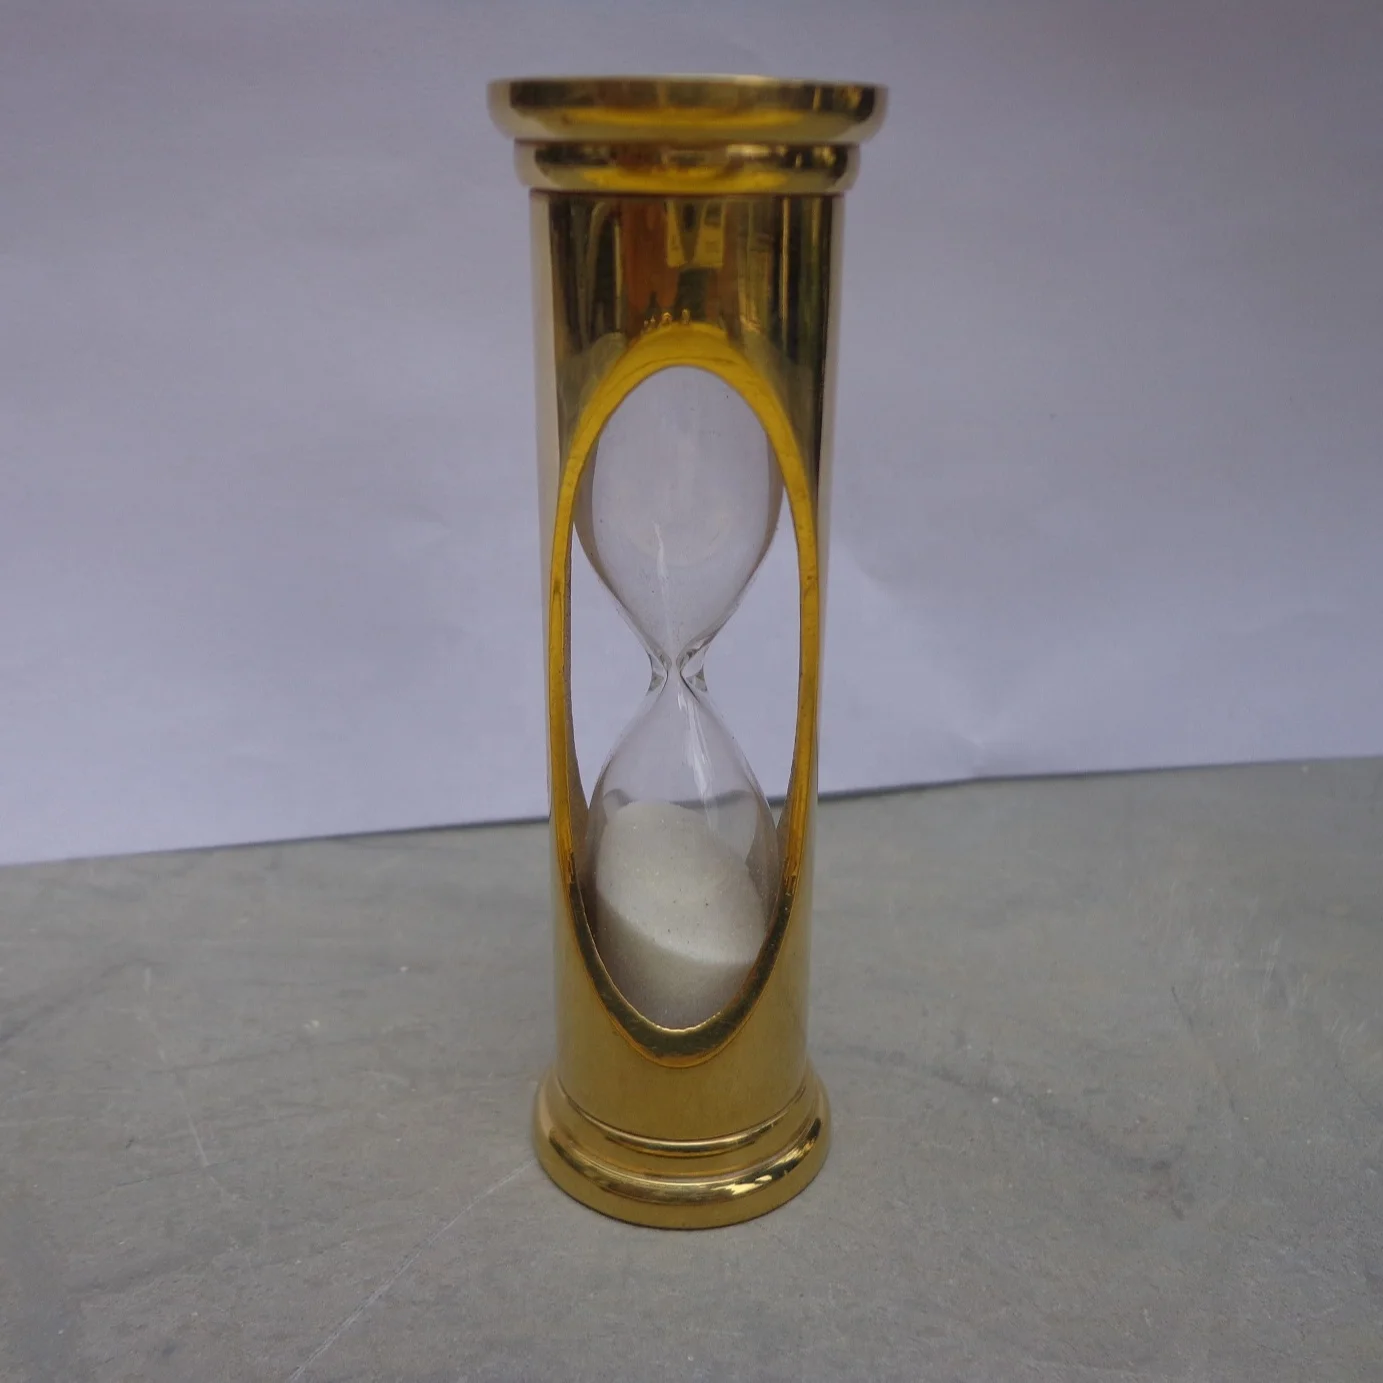 Hourglass Timer Sand Clock with 5 Minutes & Brass Metal Hour Glass 